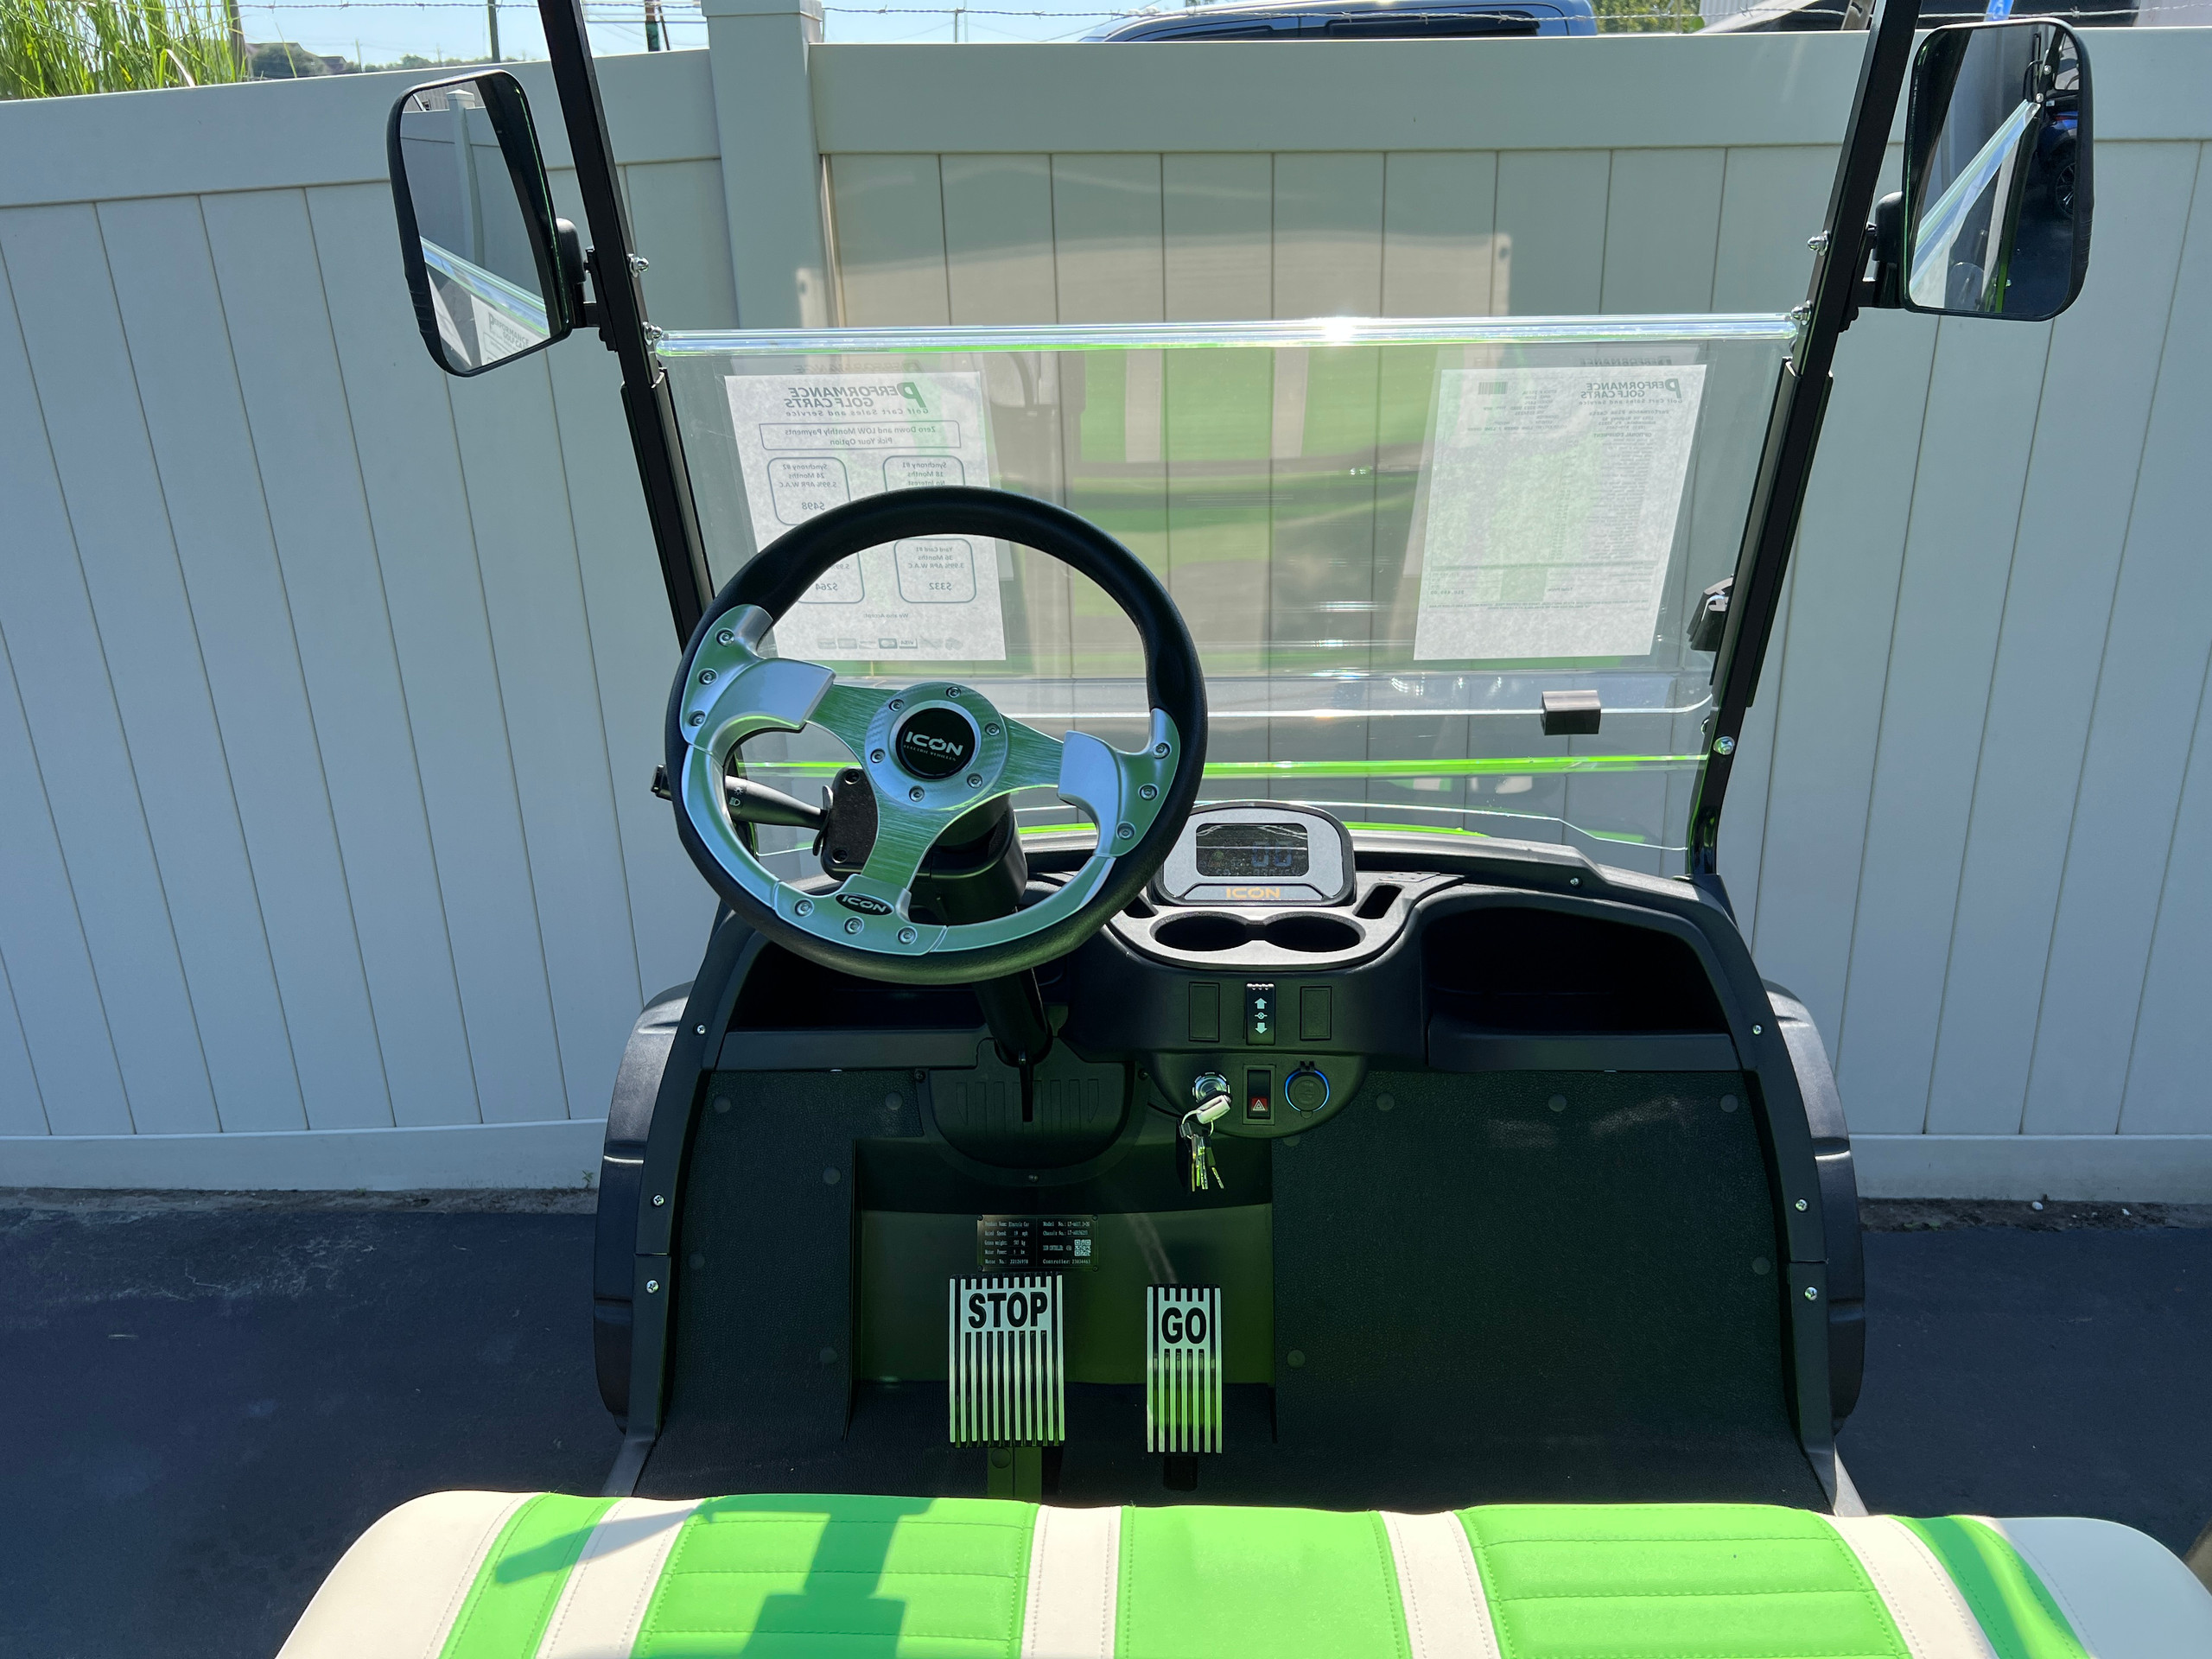 ICON i40L 4 Passenger Lifted Lime Green Golf Cart from Performance Plus ...